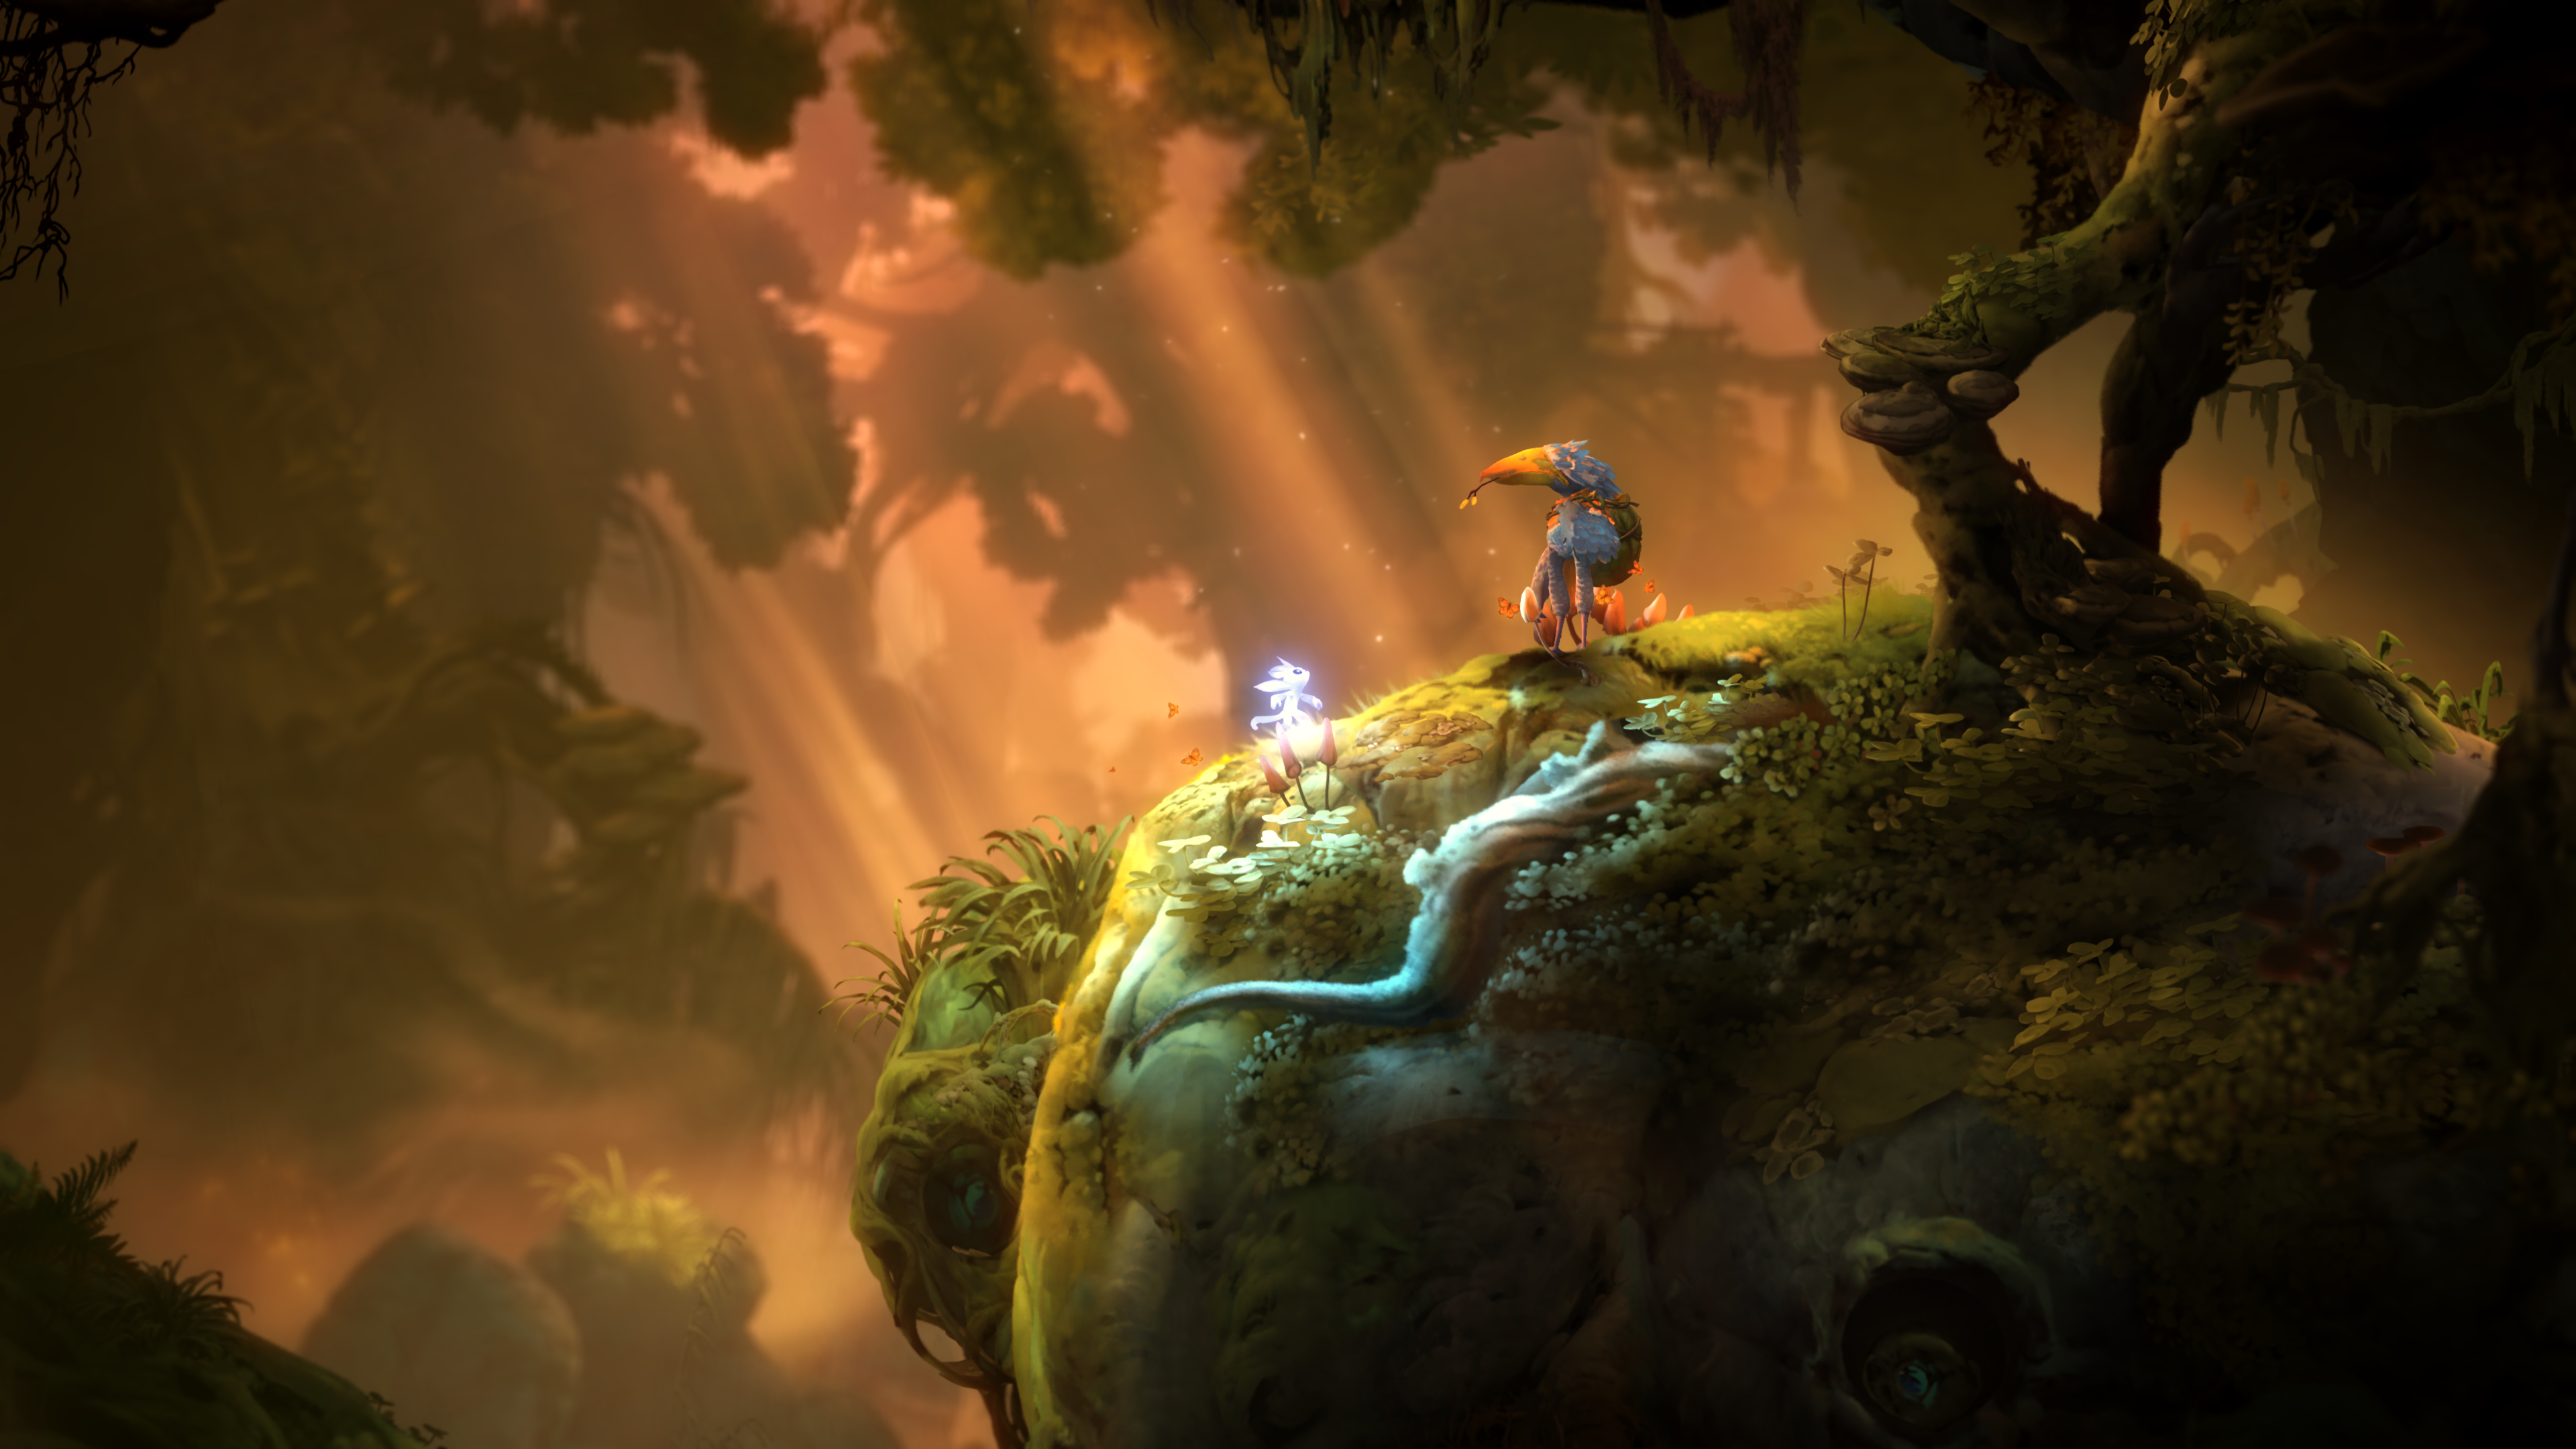 ori and will of wisps release date